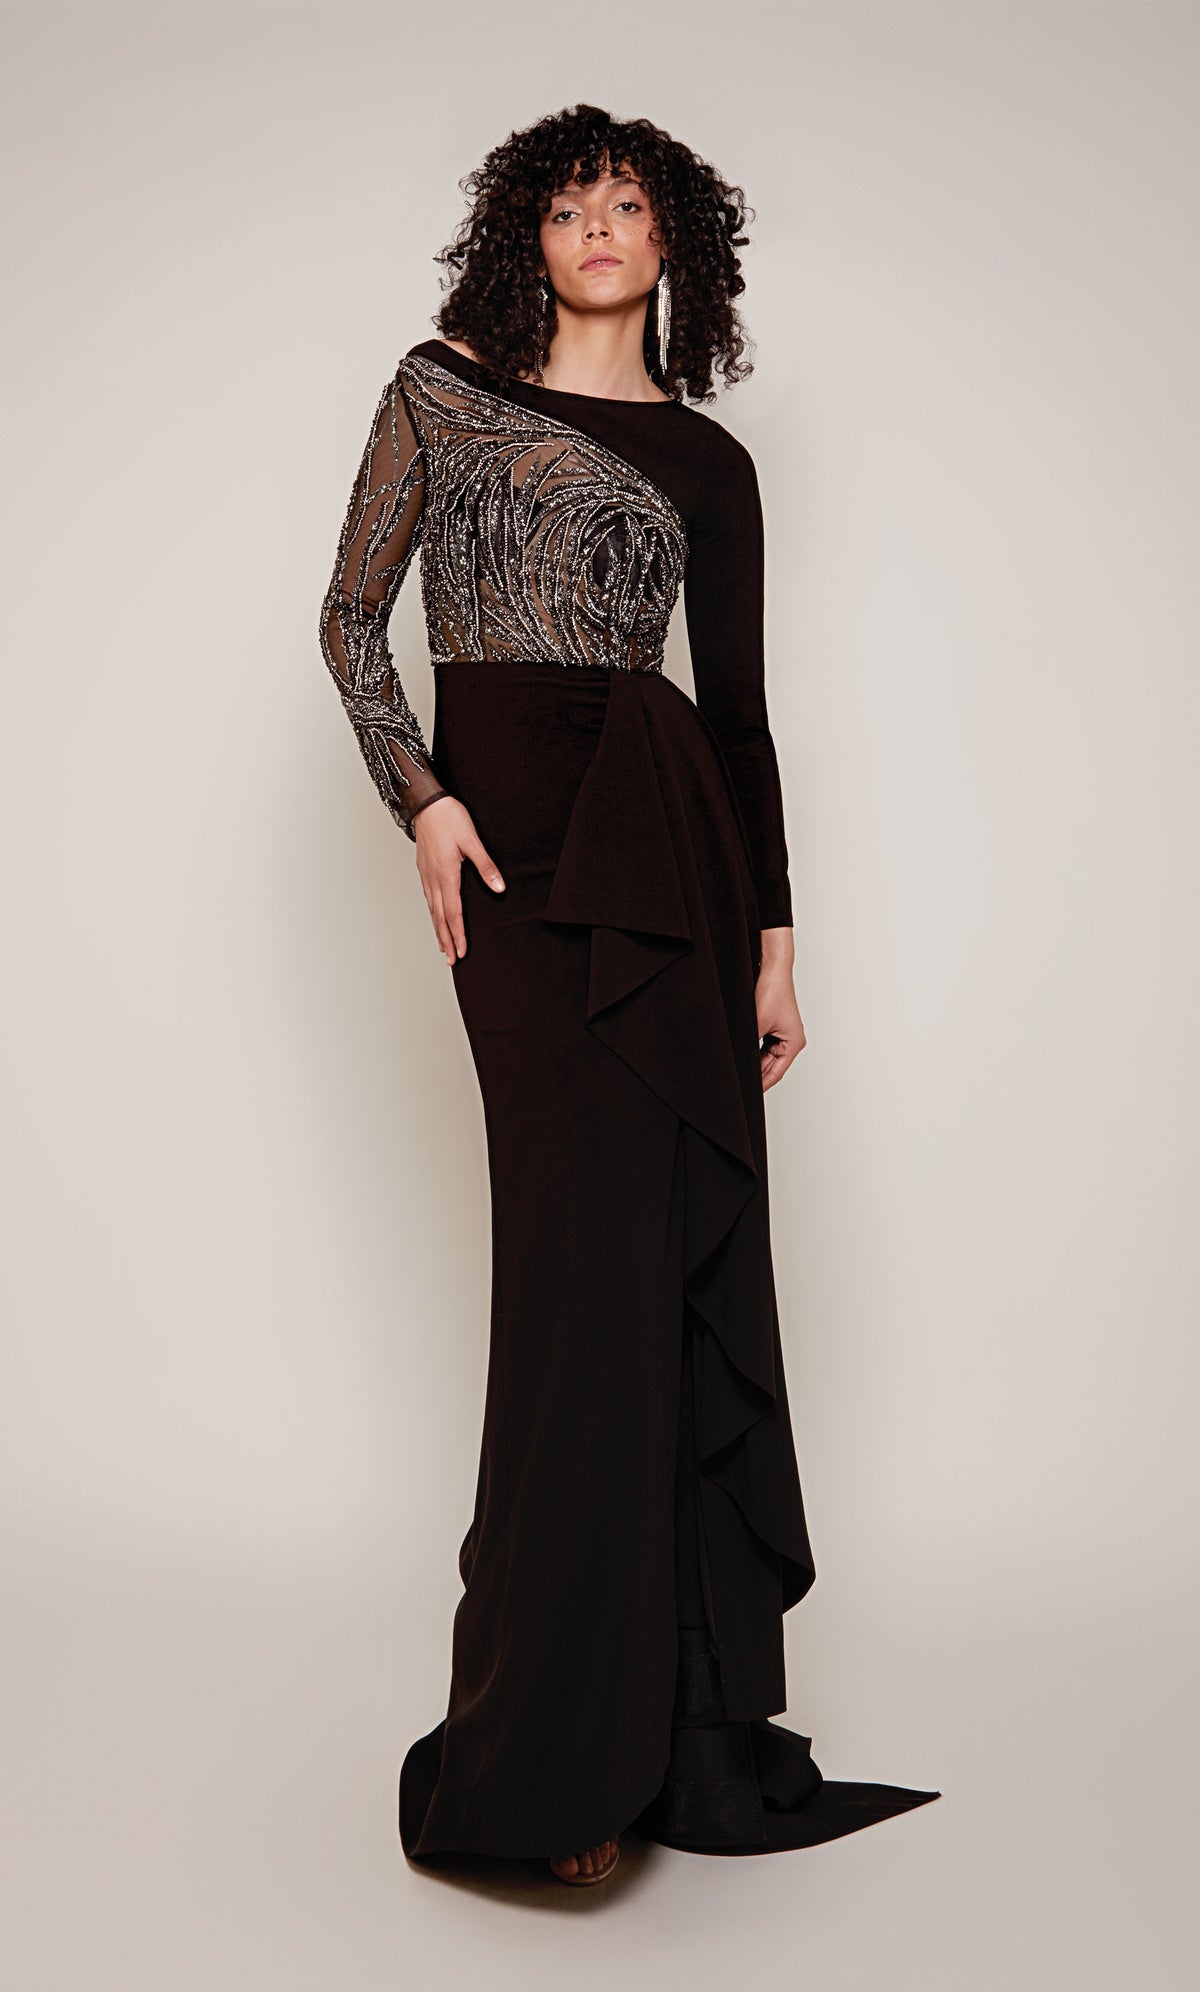 A long sleeve evening gown with a sheer, embellished bodice and sleeve and a cascading ruffle in classic black with silver accents.